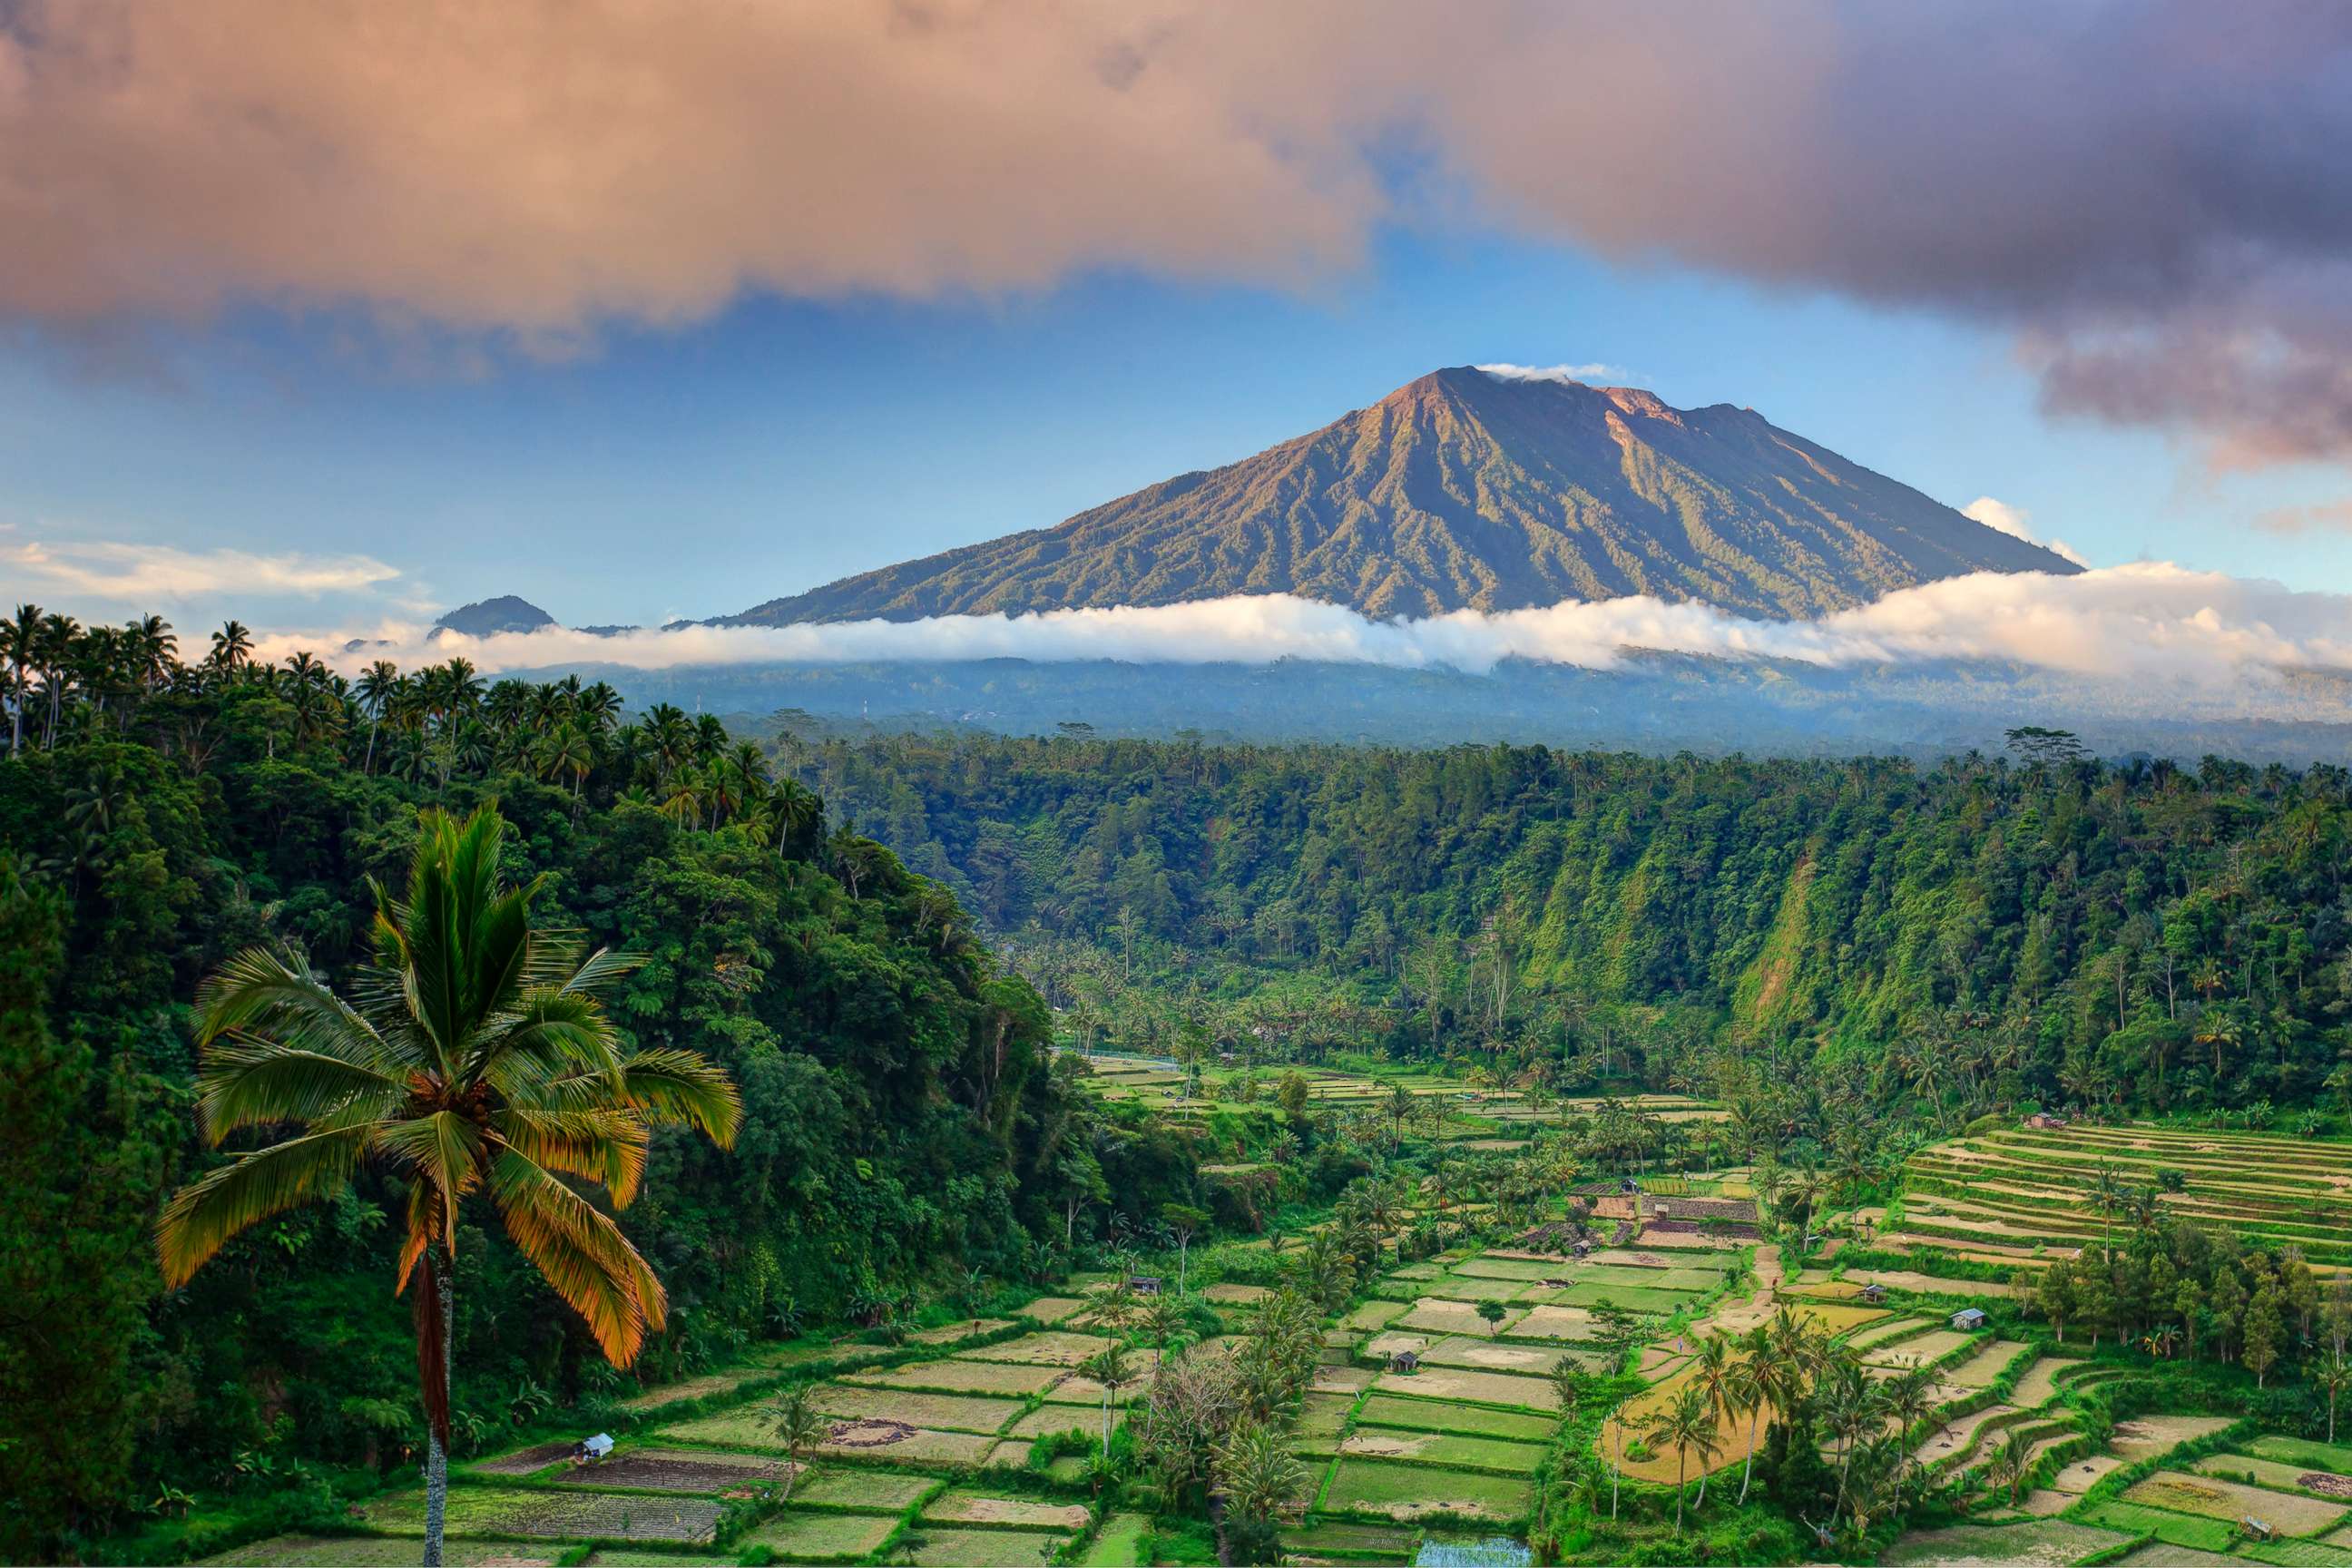 PHOTO: Rice terraces in the village of Rendang and Gunung Agung Volcano in Bali, Indonesia, are pictured in this undated stock photo.